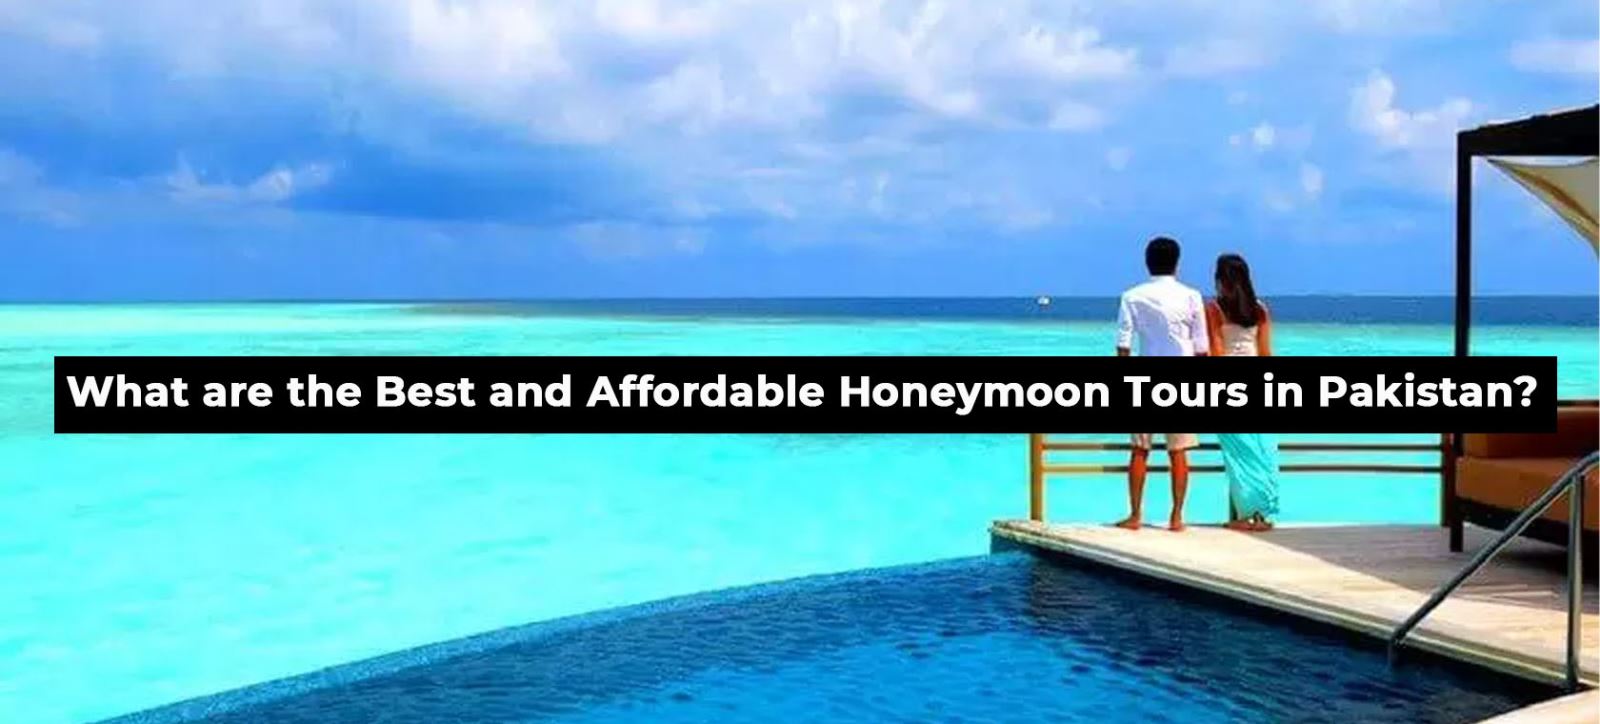 What are the Best and Affordable Honeymoon Tours in Pakistan